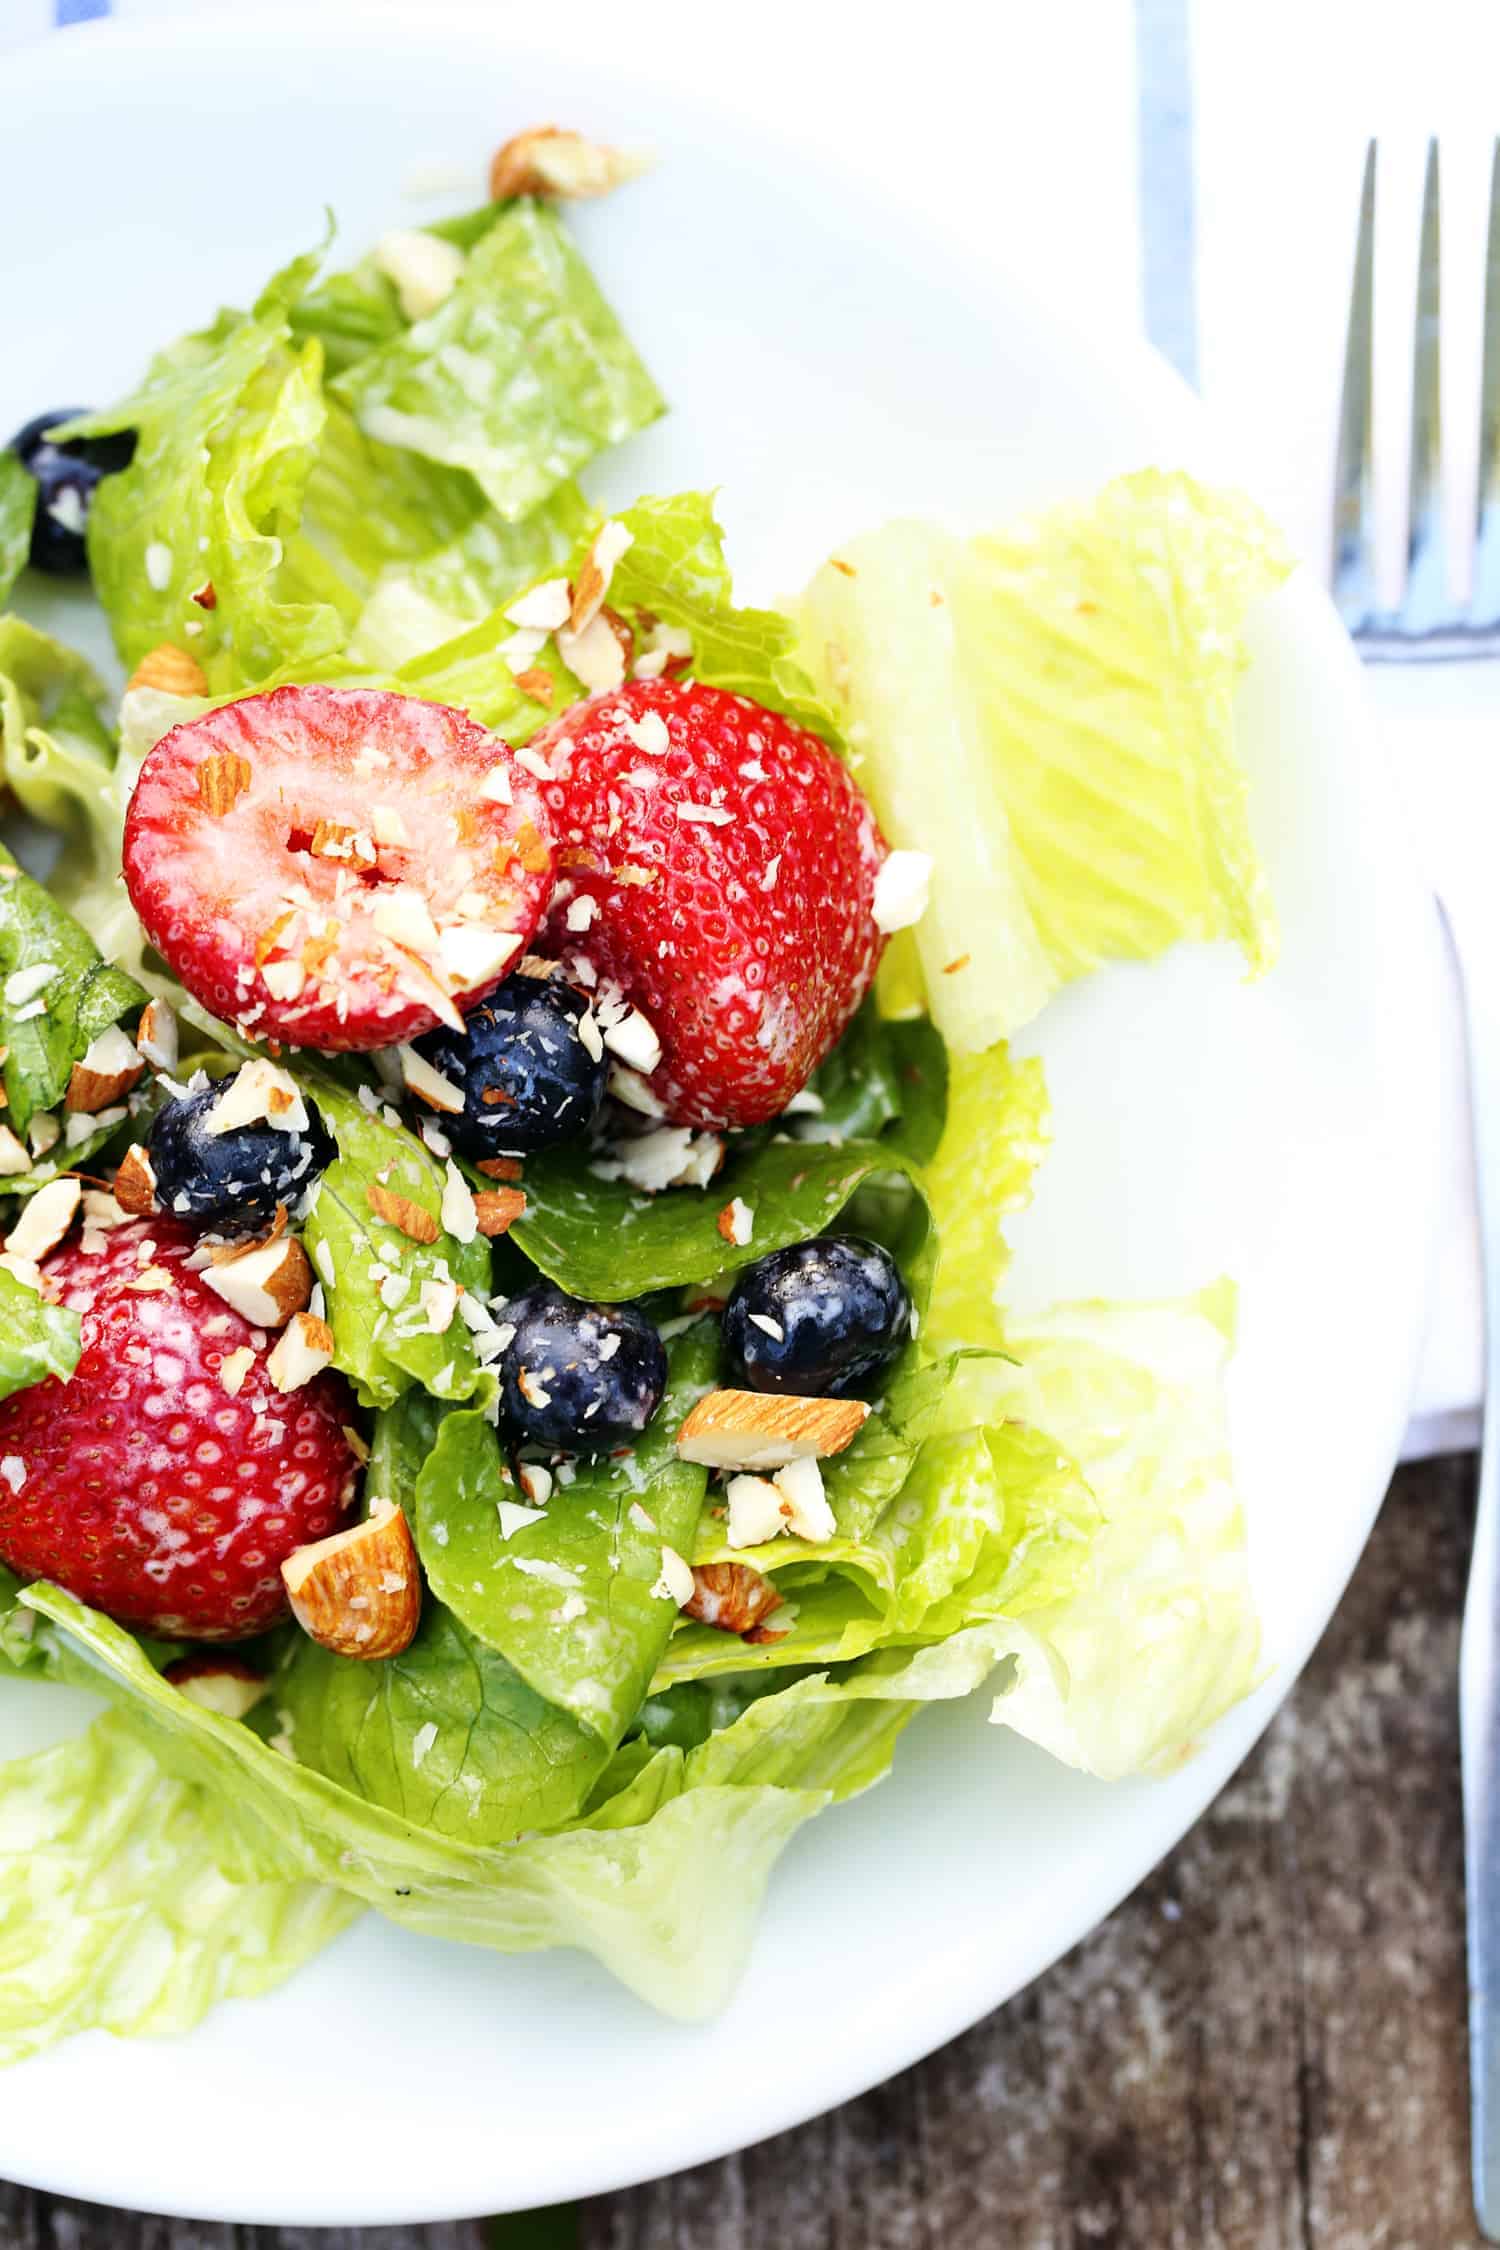 Red, White and Blue Summer Fruit Salad with Creamy Lemon Dressing is the perfect light, refreshing summer salad to bring to parties, picnics and potlucks. fruit salad recipe | strawberry salad | summer salad lemon dressing | potluck recipe | picnic salad